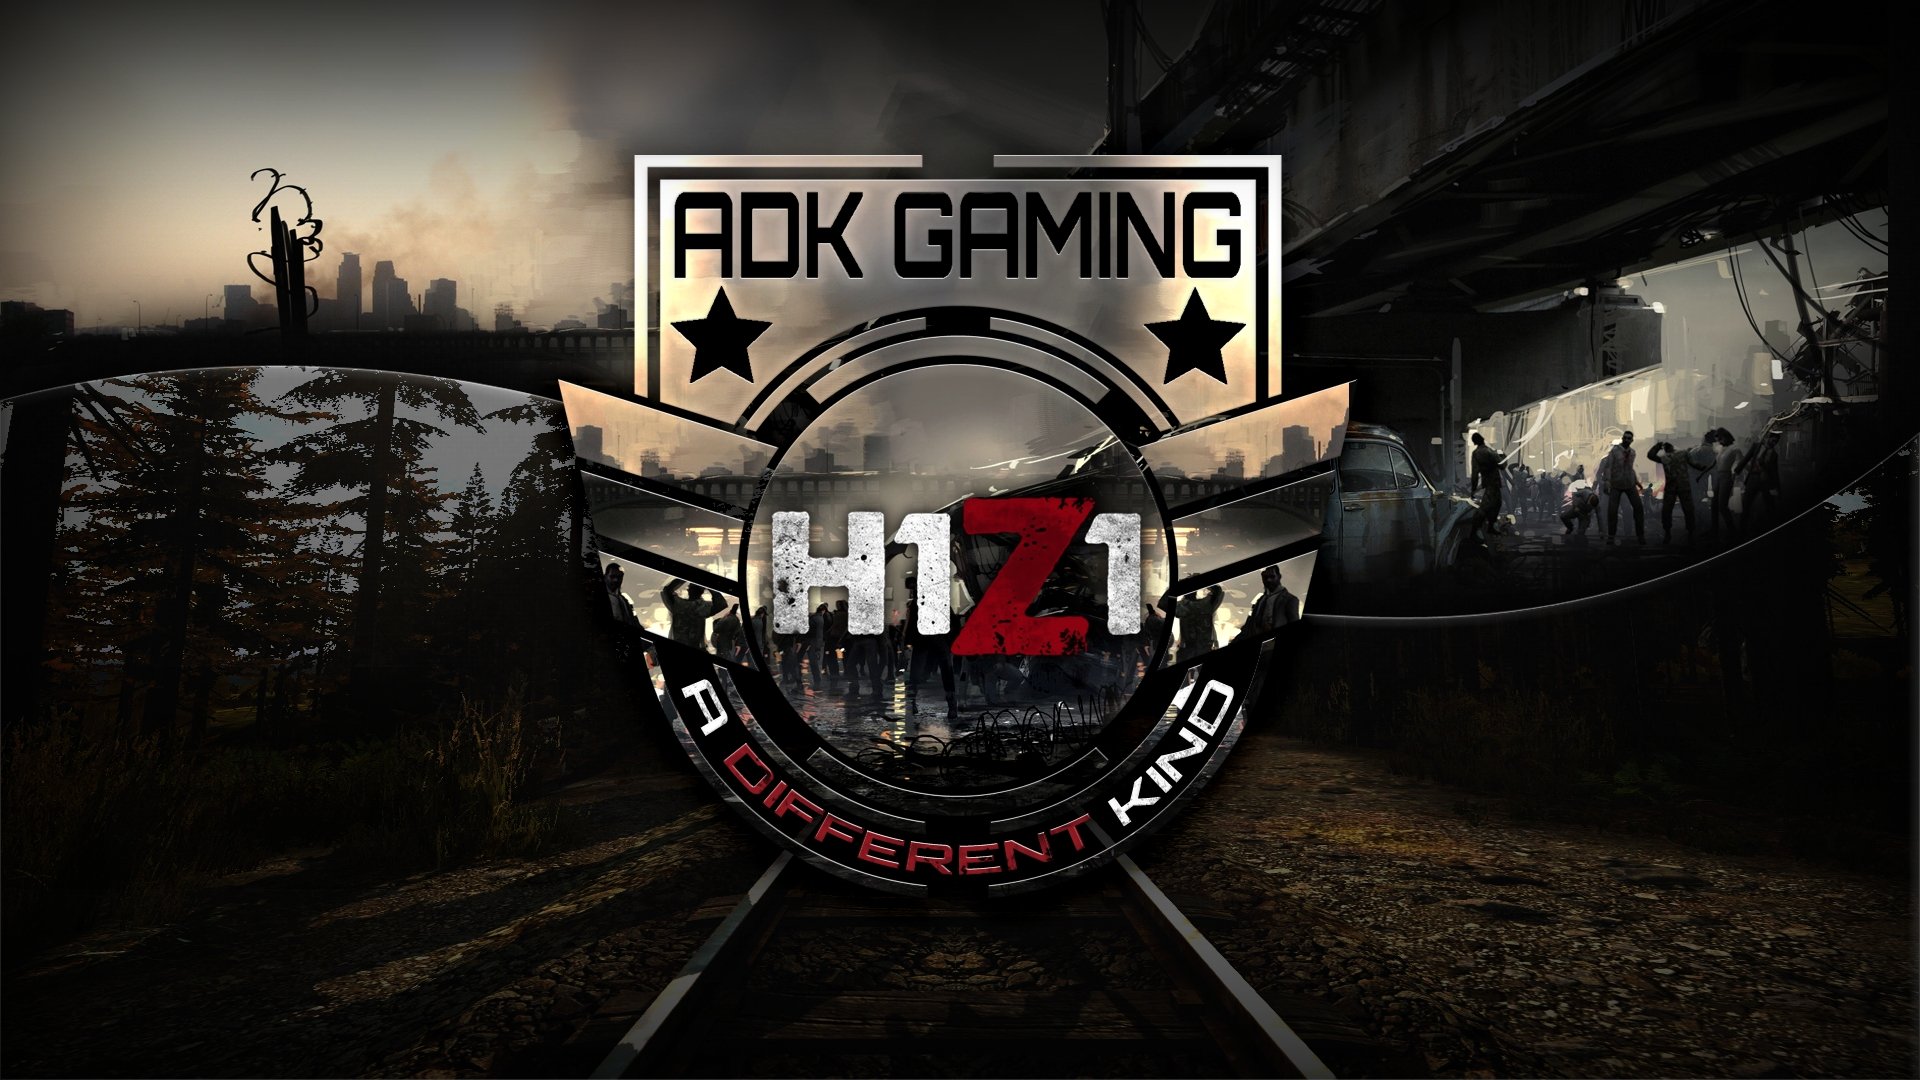 New H1Z1 Wallpaper HD FULL HD 1080p For PC Desk FREE DOWNLOAD